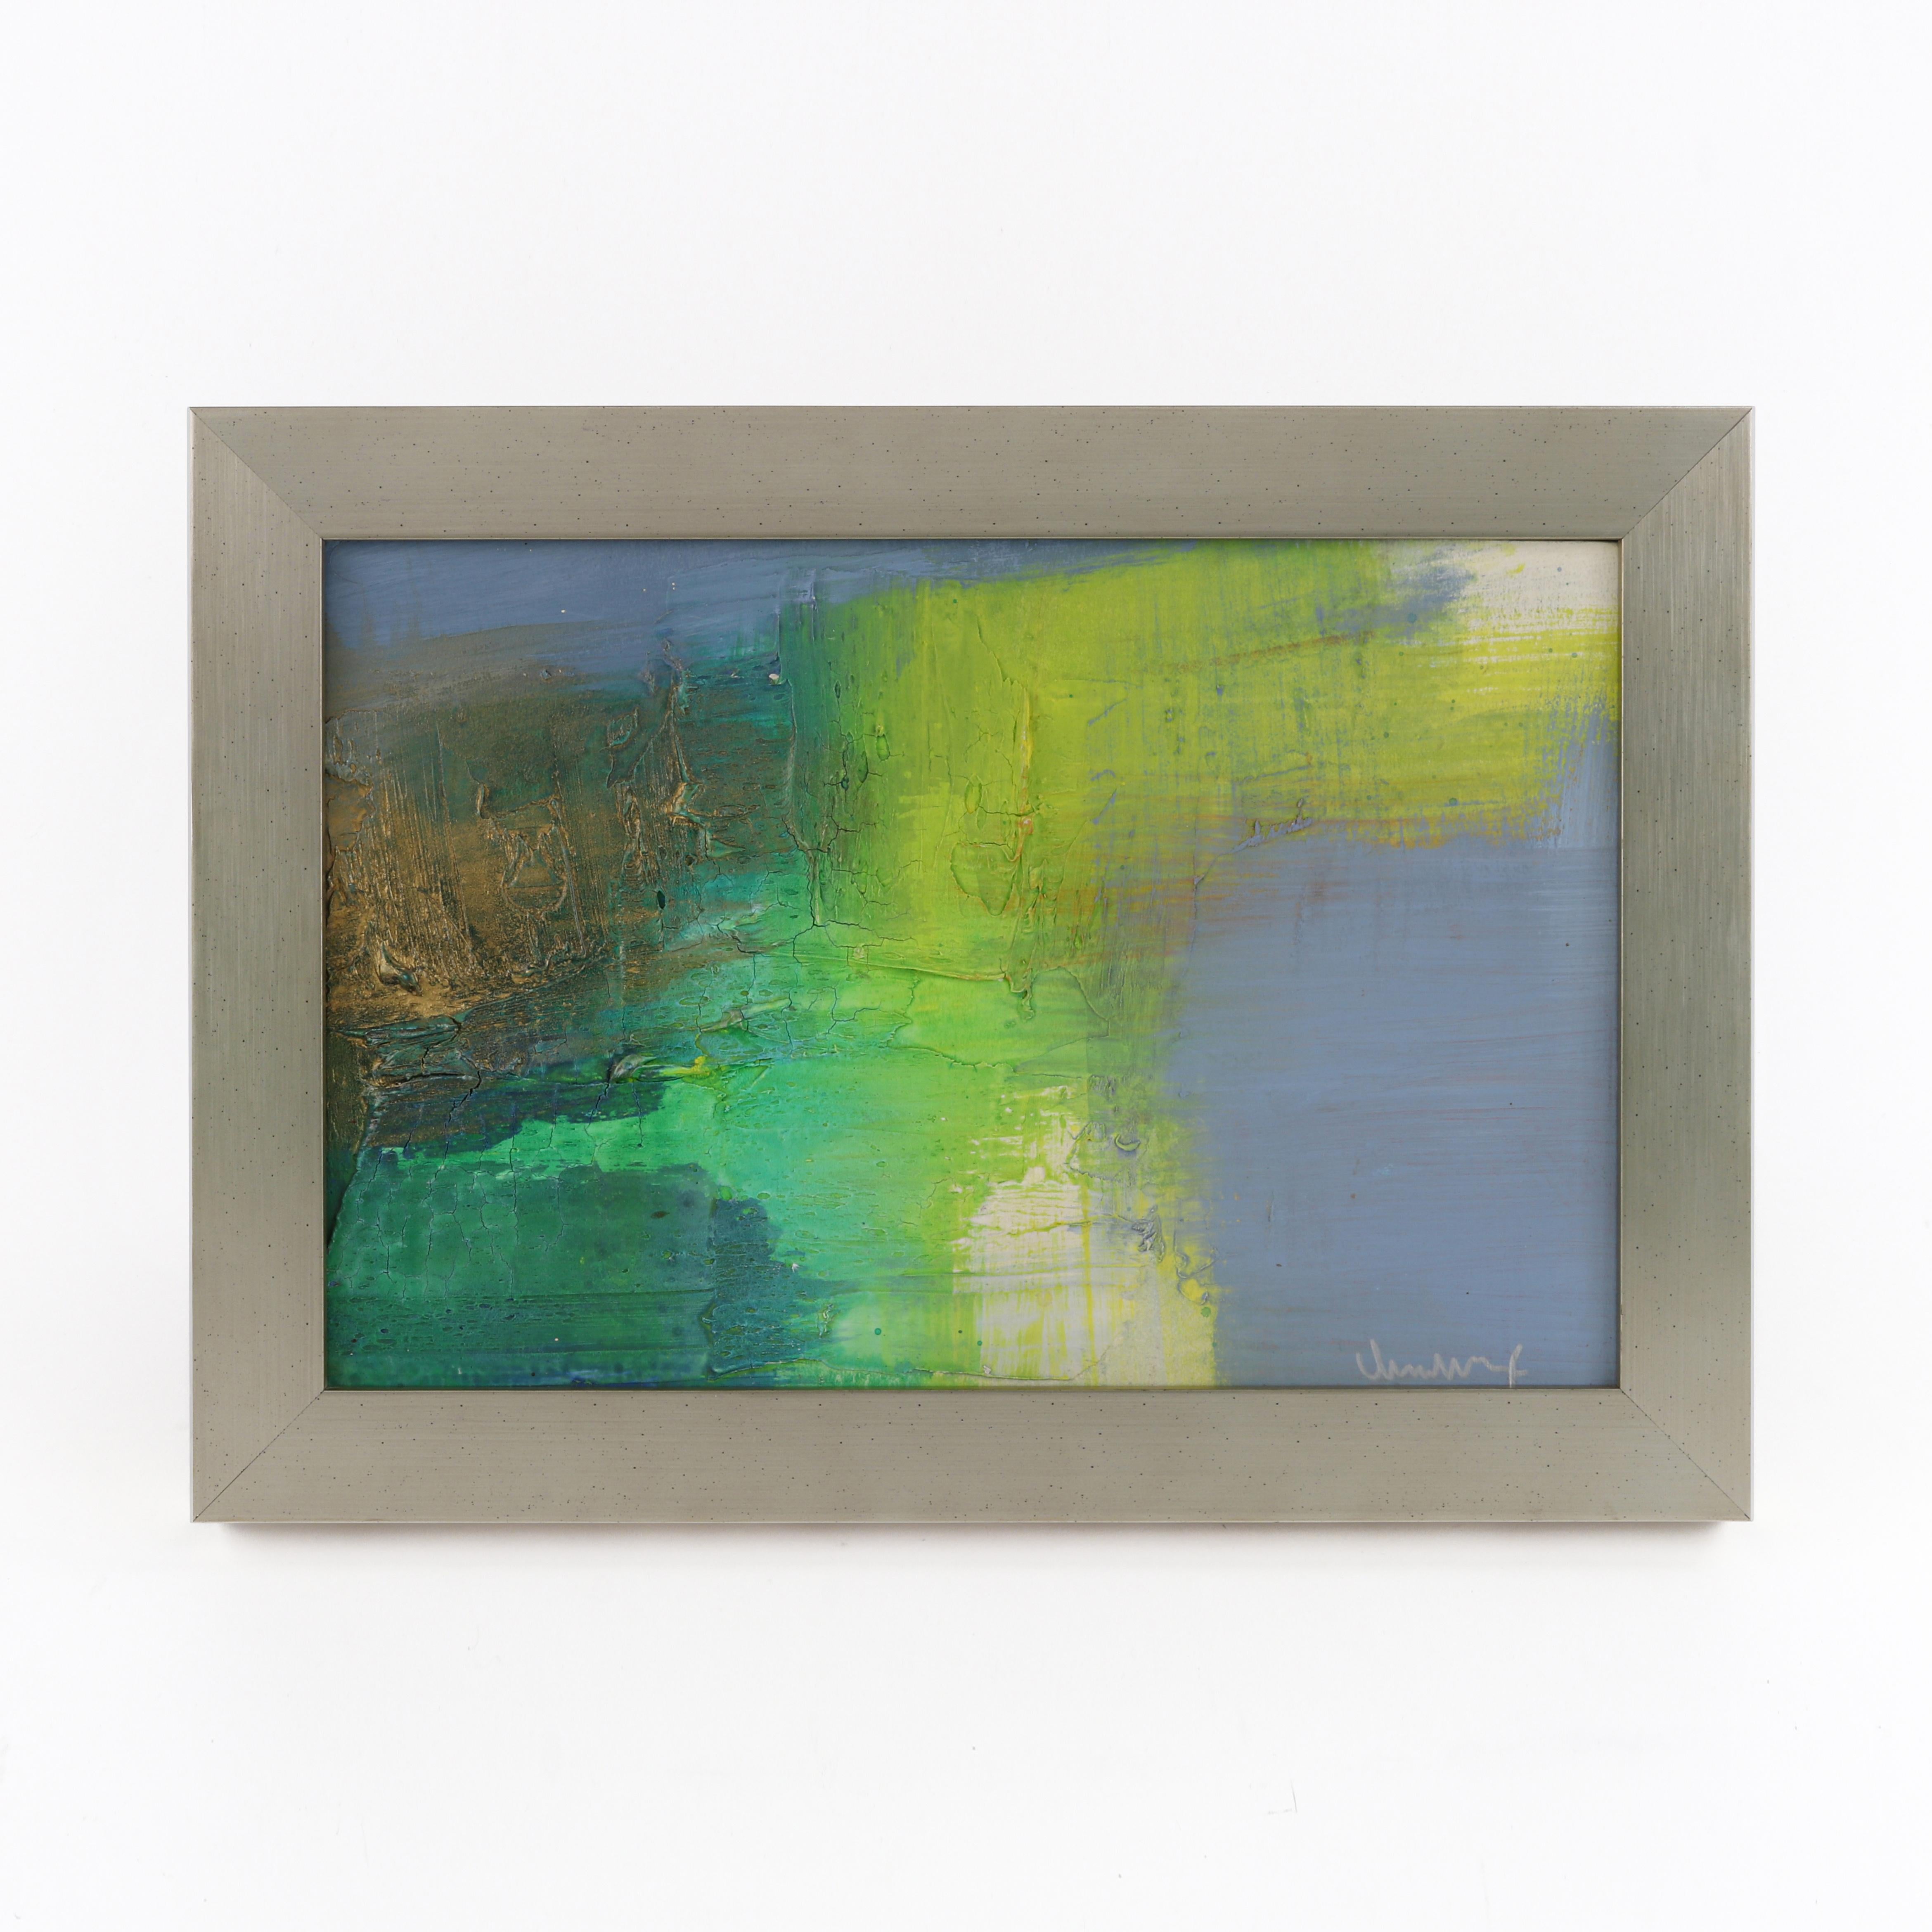 Charles Dix 1970's Modernist Post Modern Original Acrylic Impasto Painting Art Signed

A rare signed painting by artist Charles Dix. This beautiful artwork features the artists’ signature impasto application using acrylic paints. “Nonobjective”, is